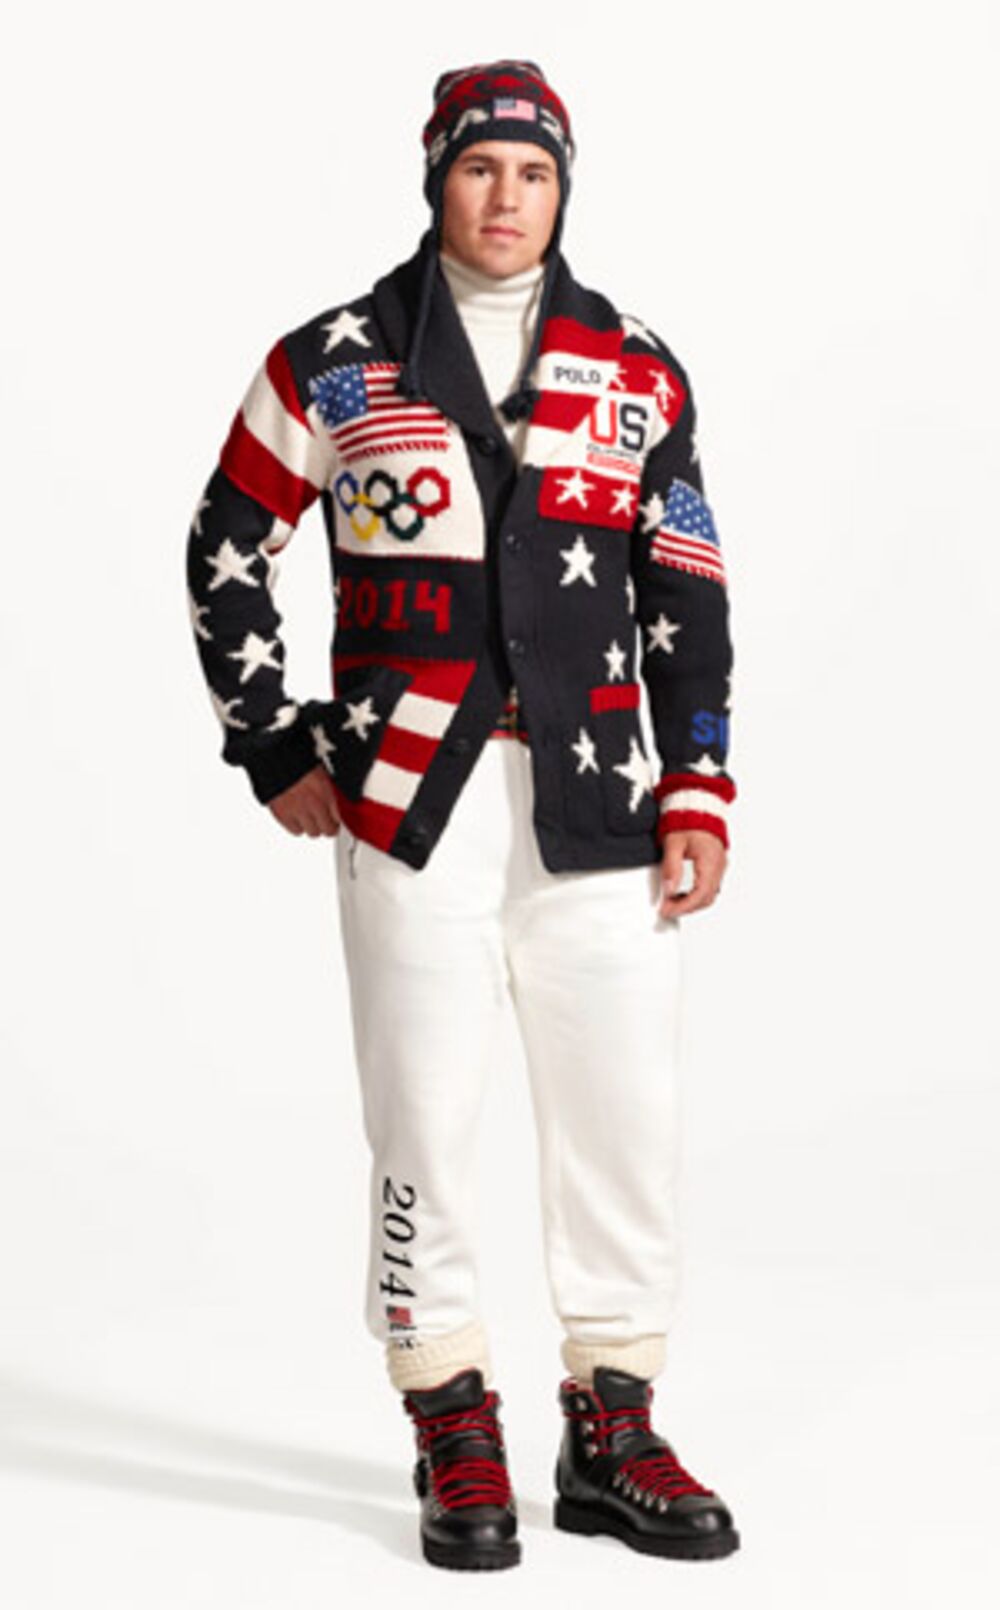 Ralph Lauren Wins With (Ugly?) Olympic 